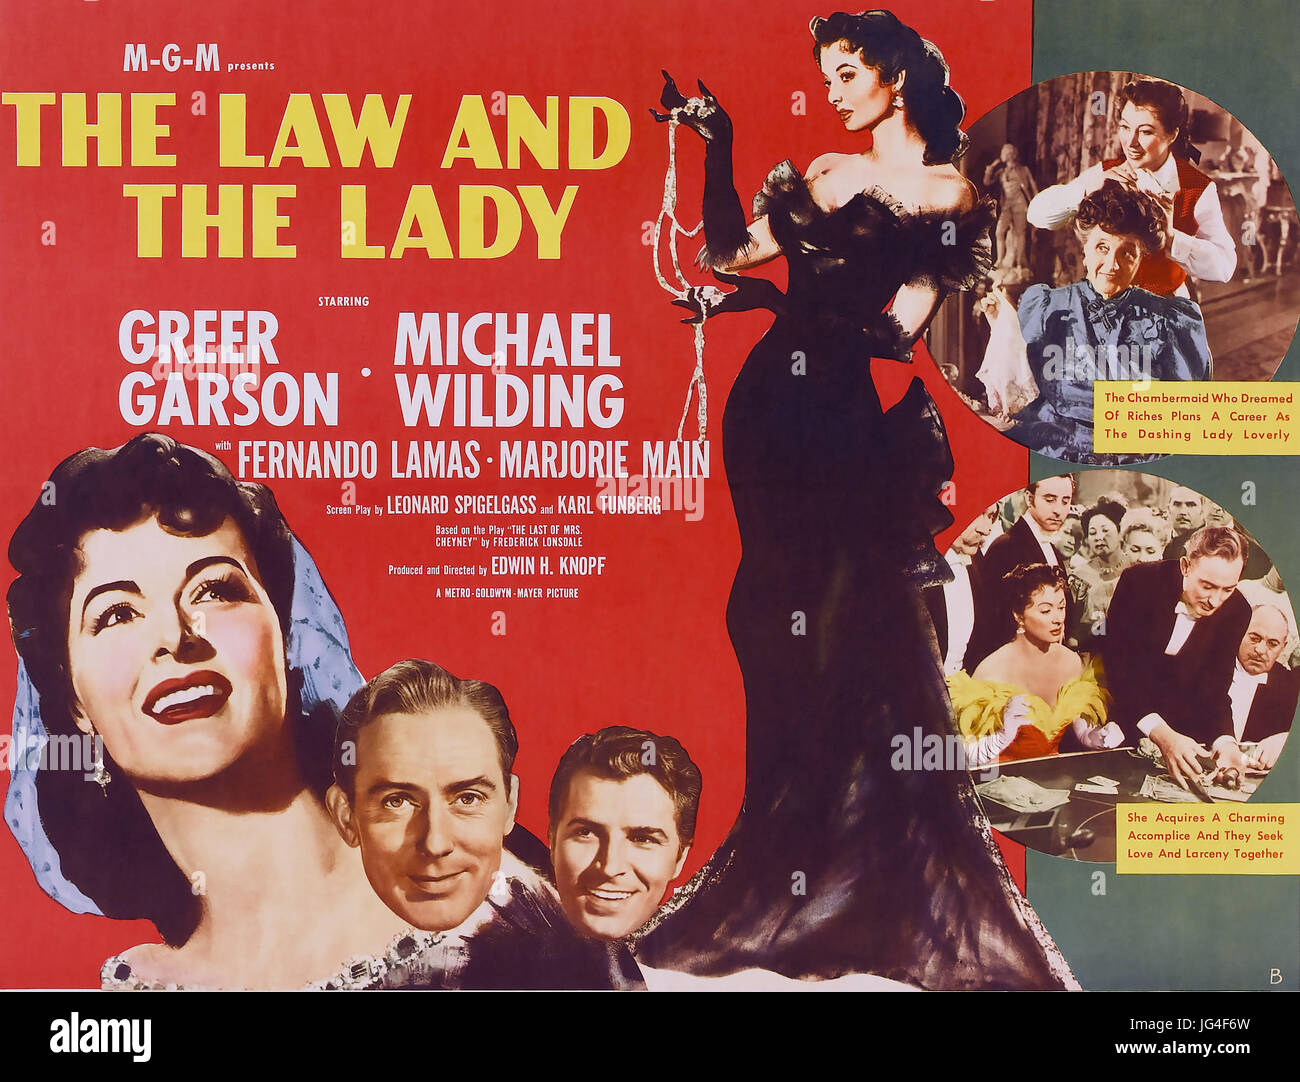 THE LAW AND THE LADY 1951  MGM film with Greer Garson Stock Photo